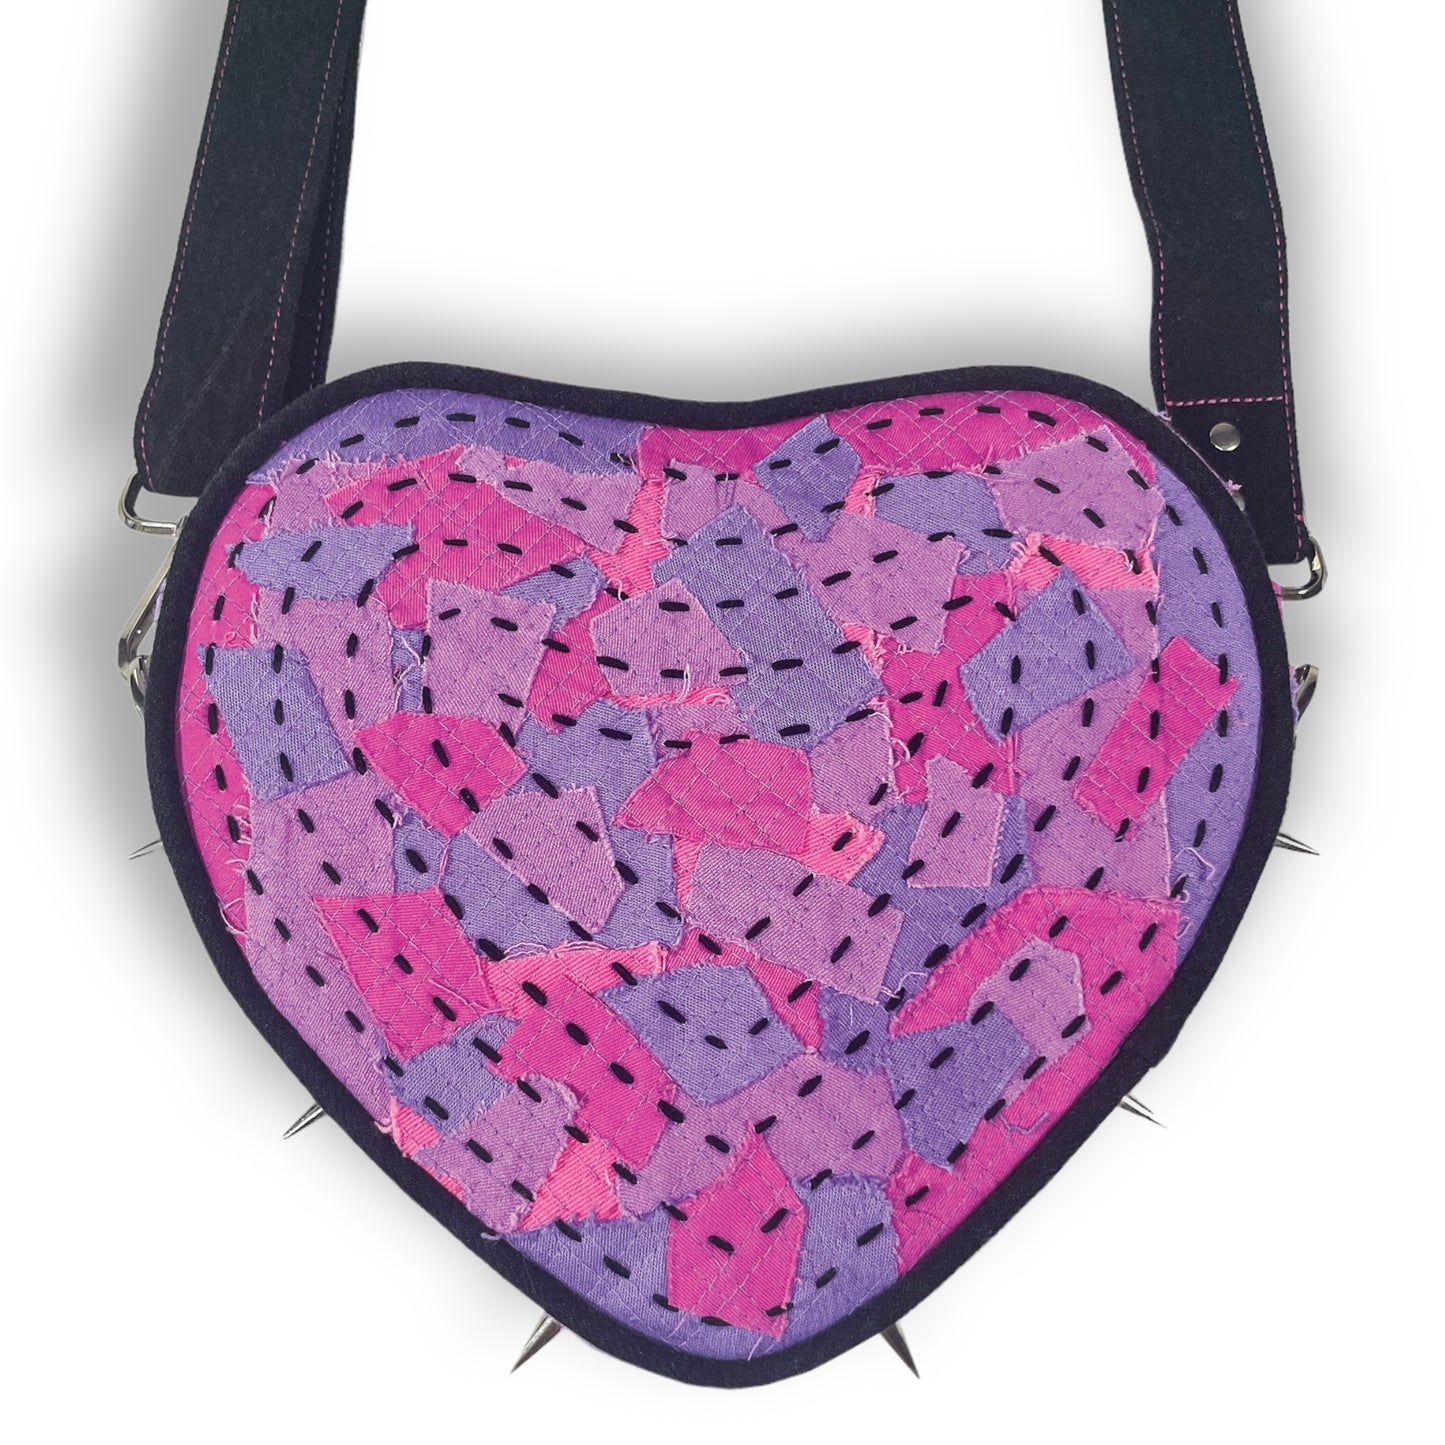 "Distorted Love" Heart Bag 1of1